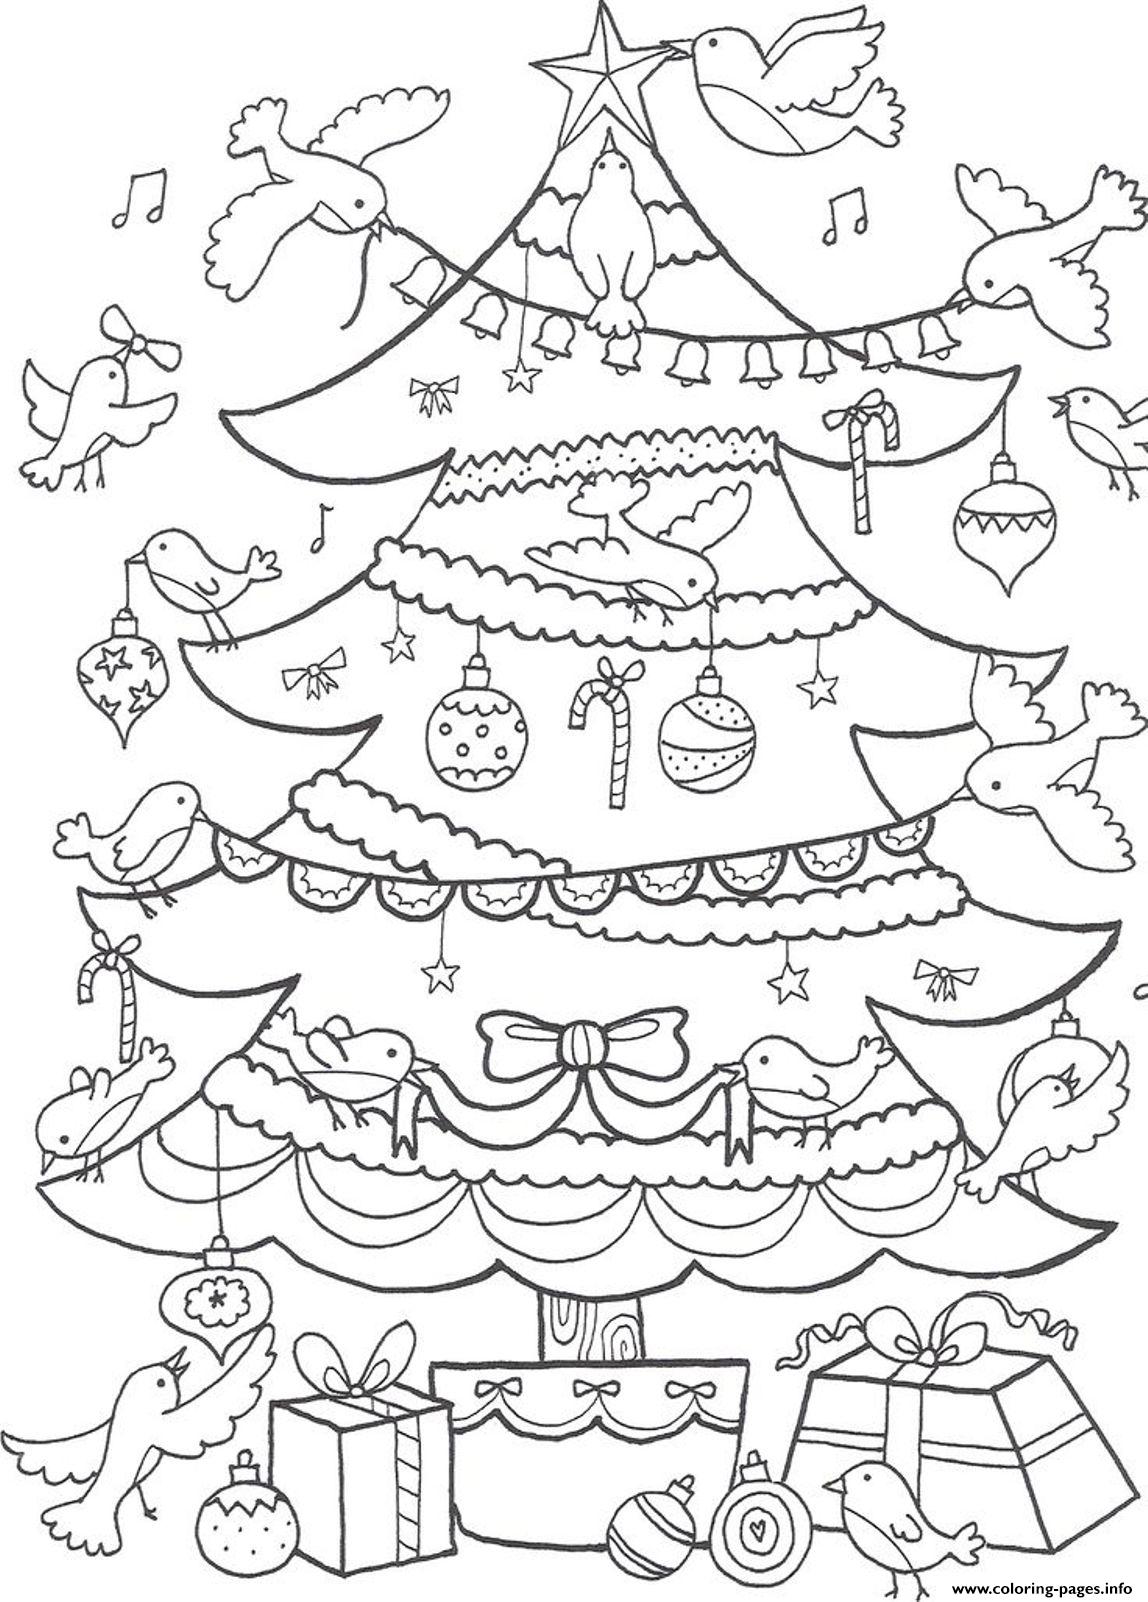 Birds Decorating Christmas Tree D806 coloring